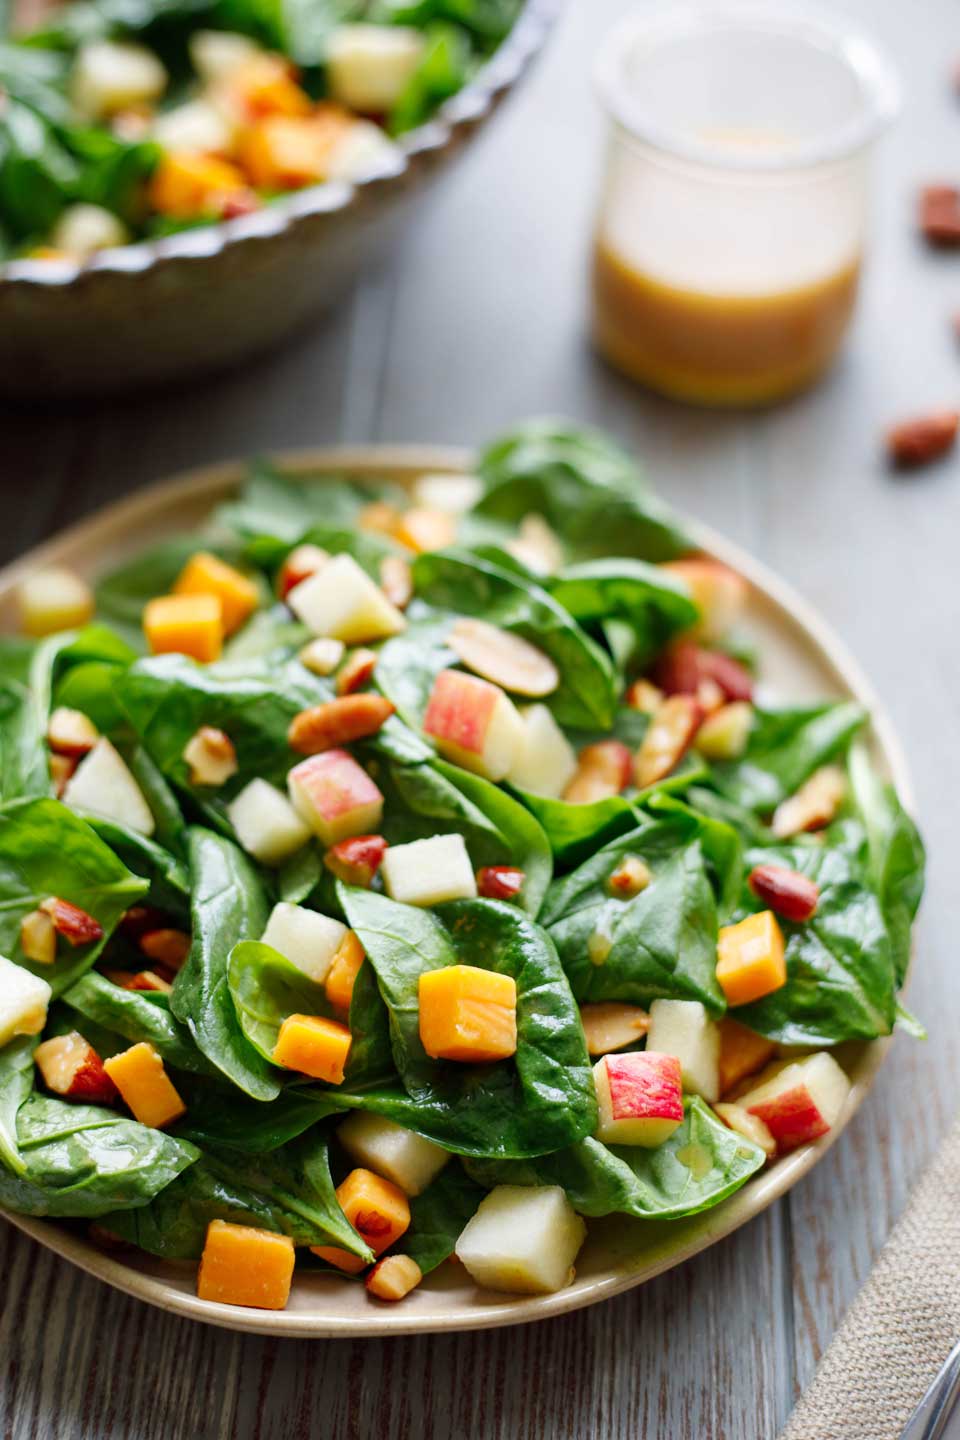 Spinach Salad with Apple, Cheddar and Smoked Almonds Recipe